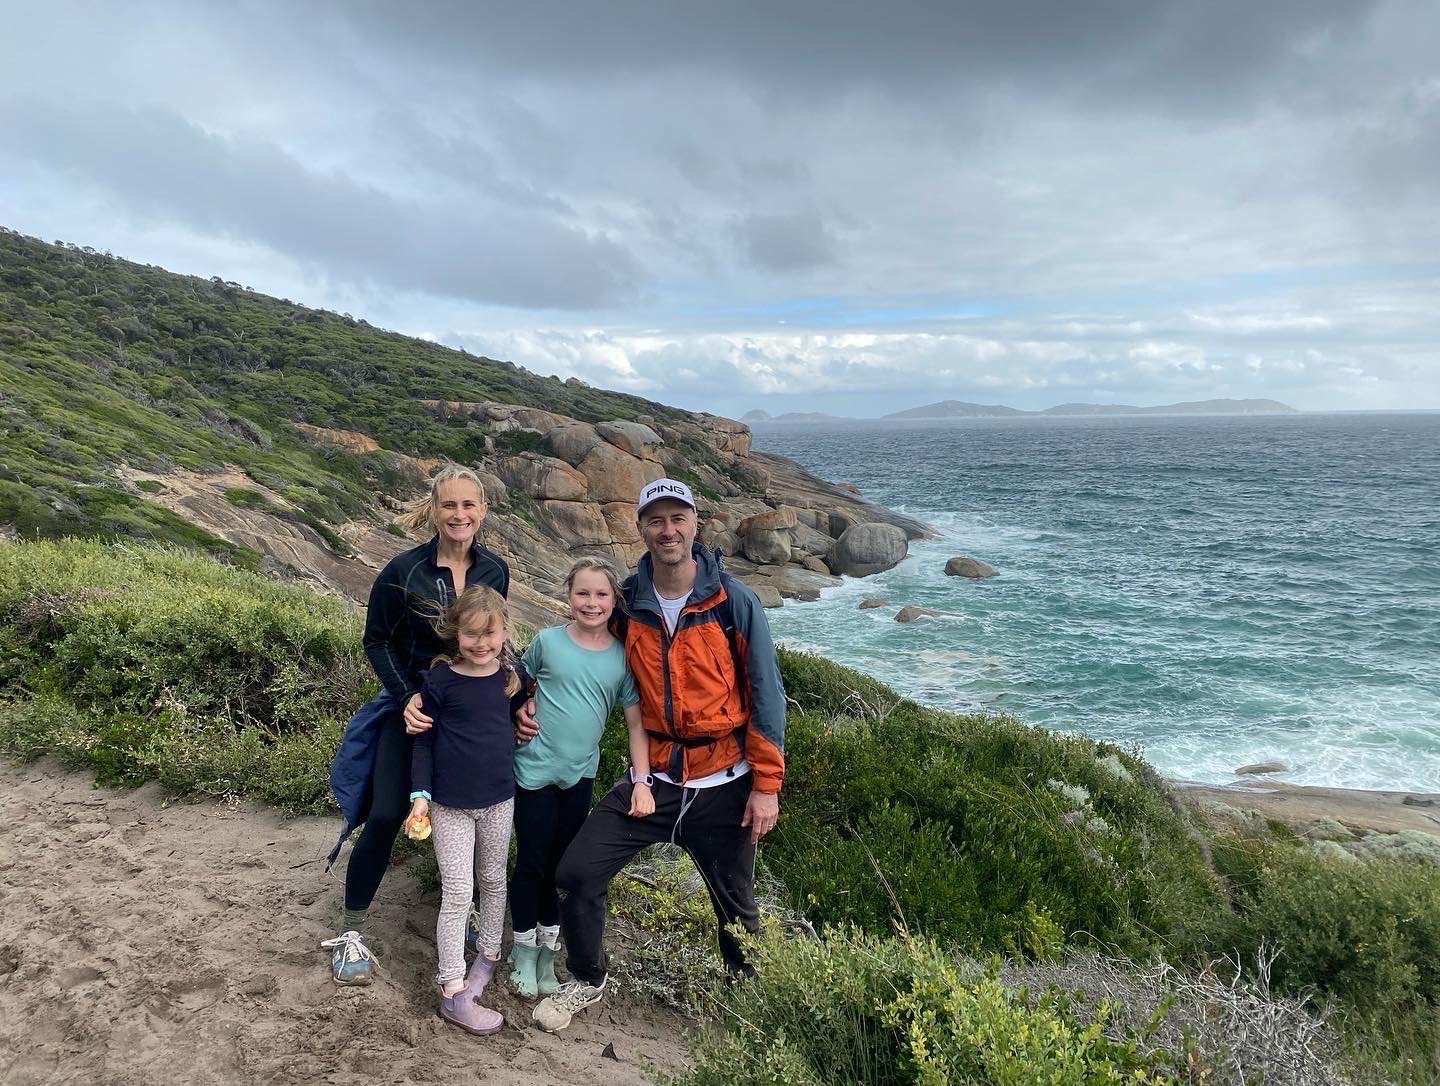 Narelle and family at Wilsons Promontory